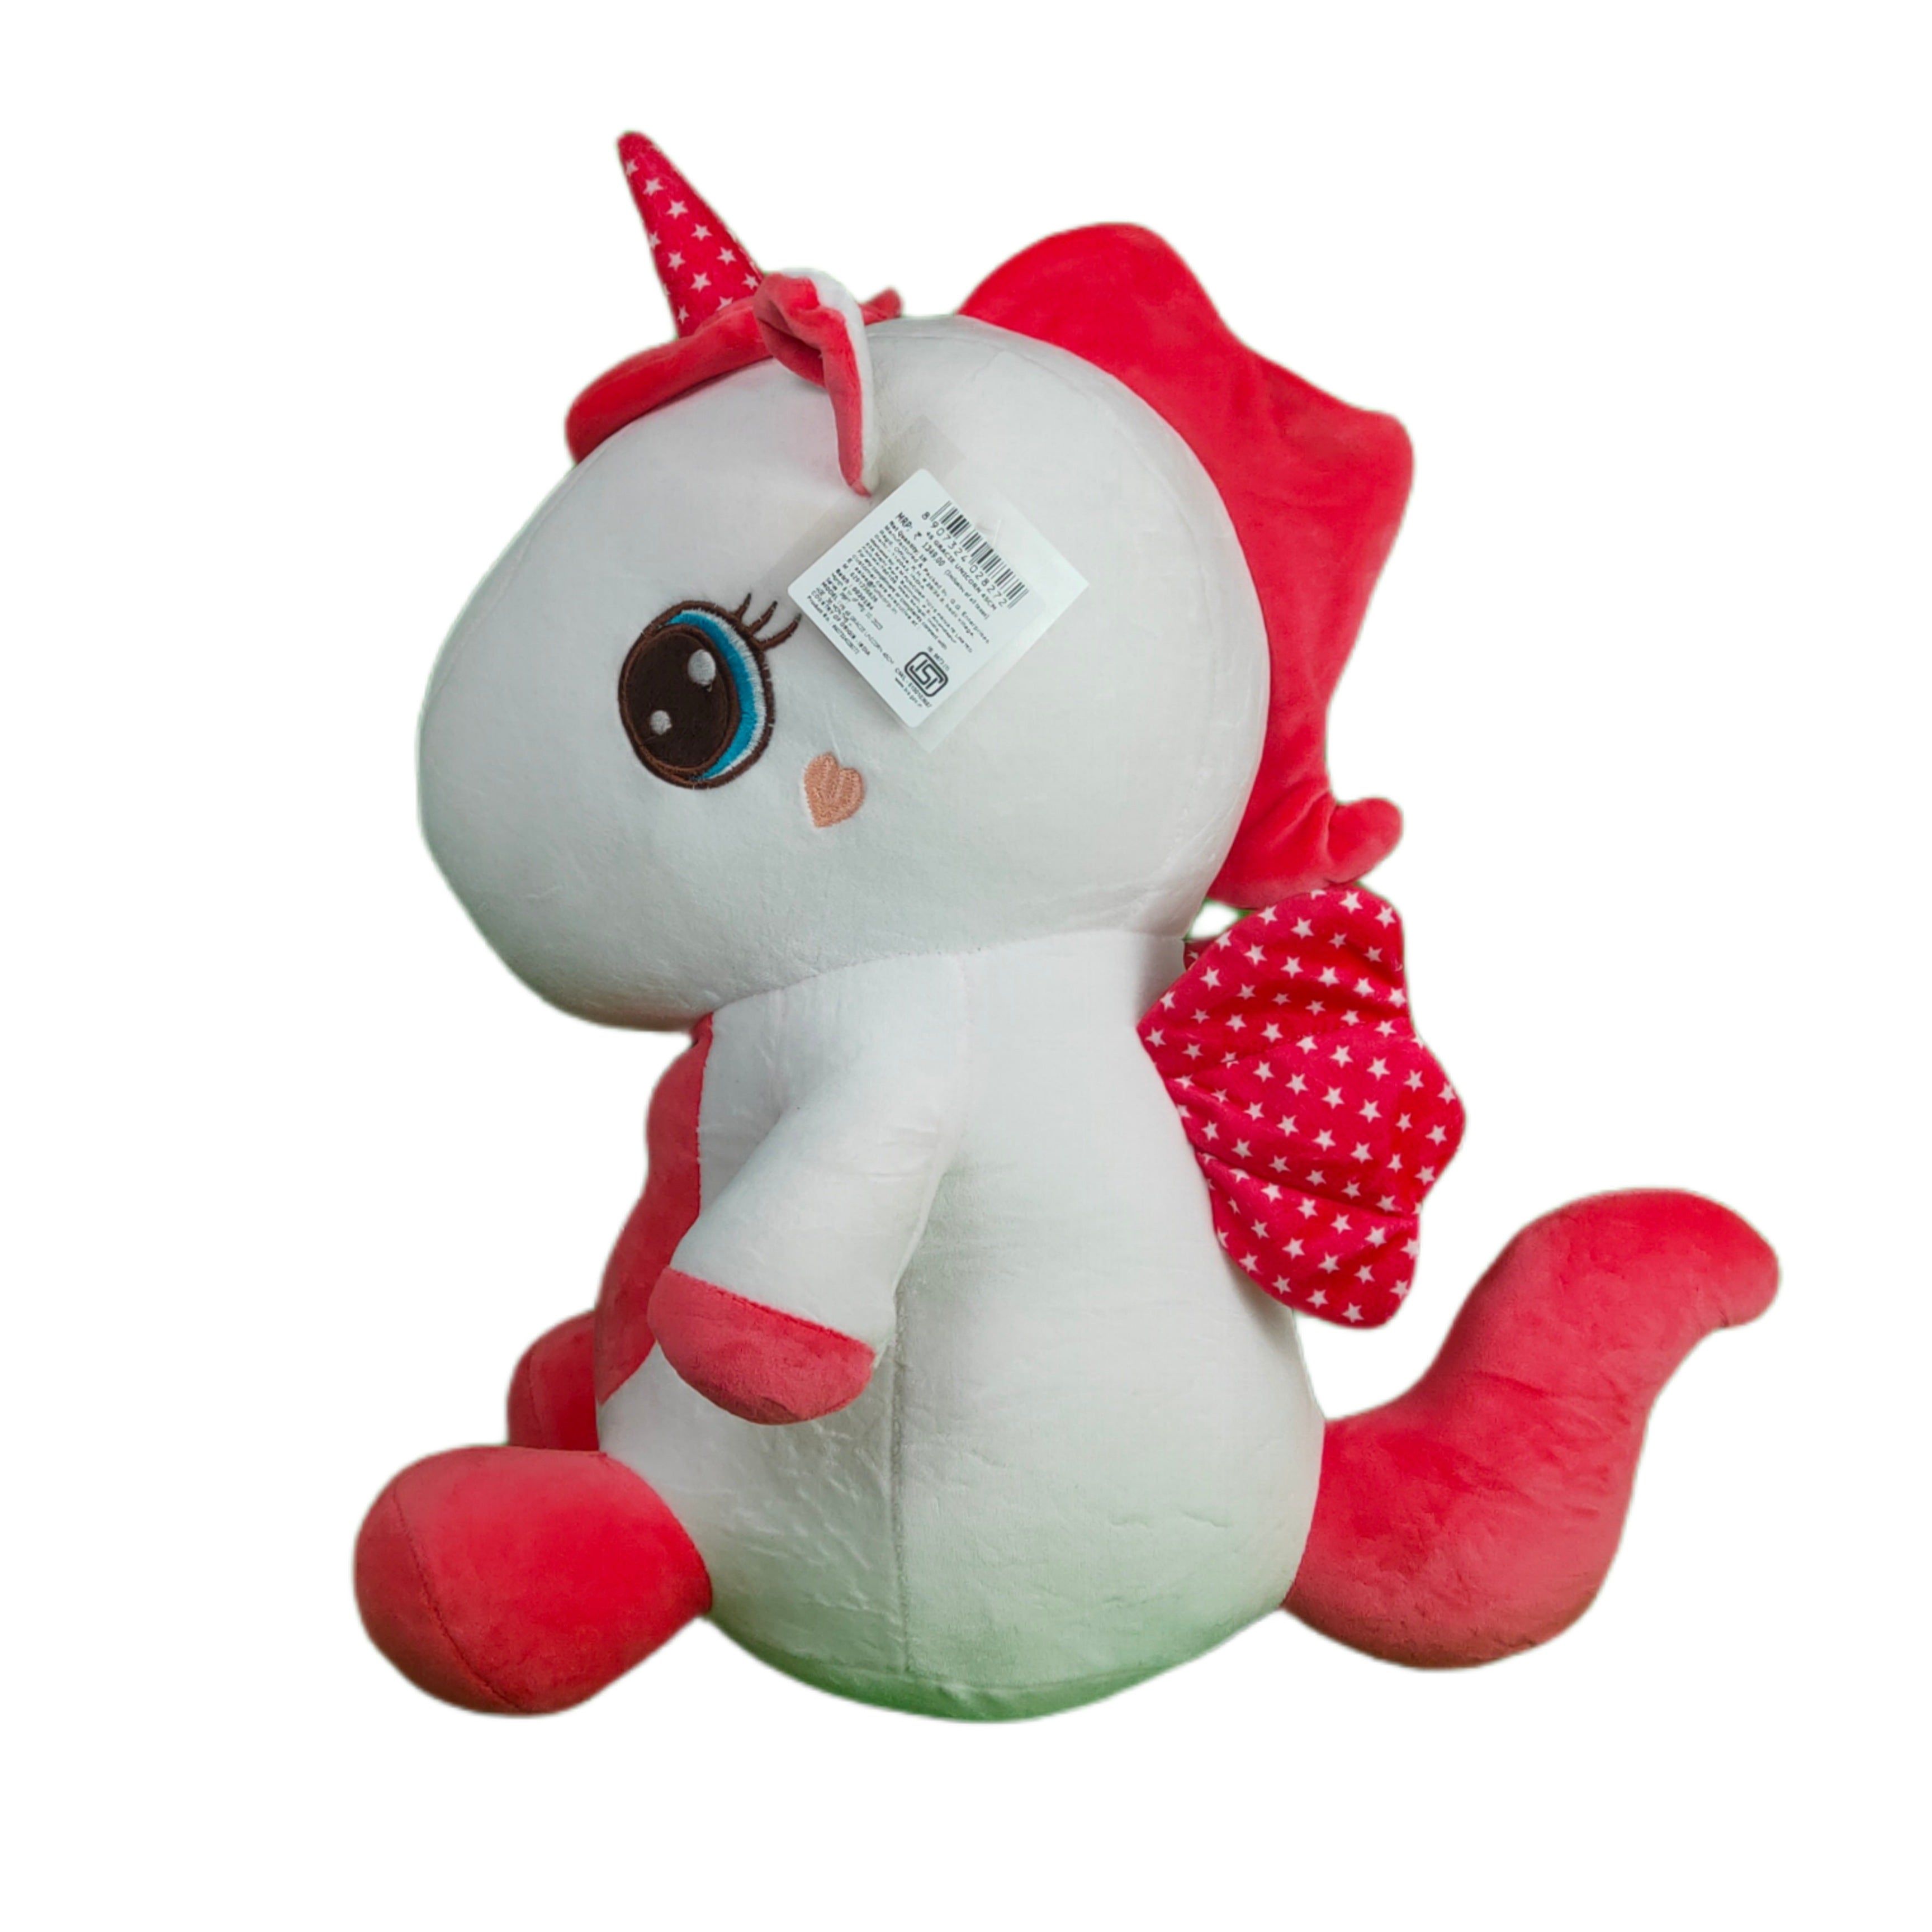 Play Hour Garcie The Unicorn Plush Soft Toy For Ages 3 Years And Up - Red, 45cm